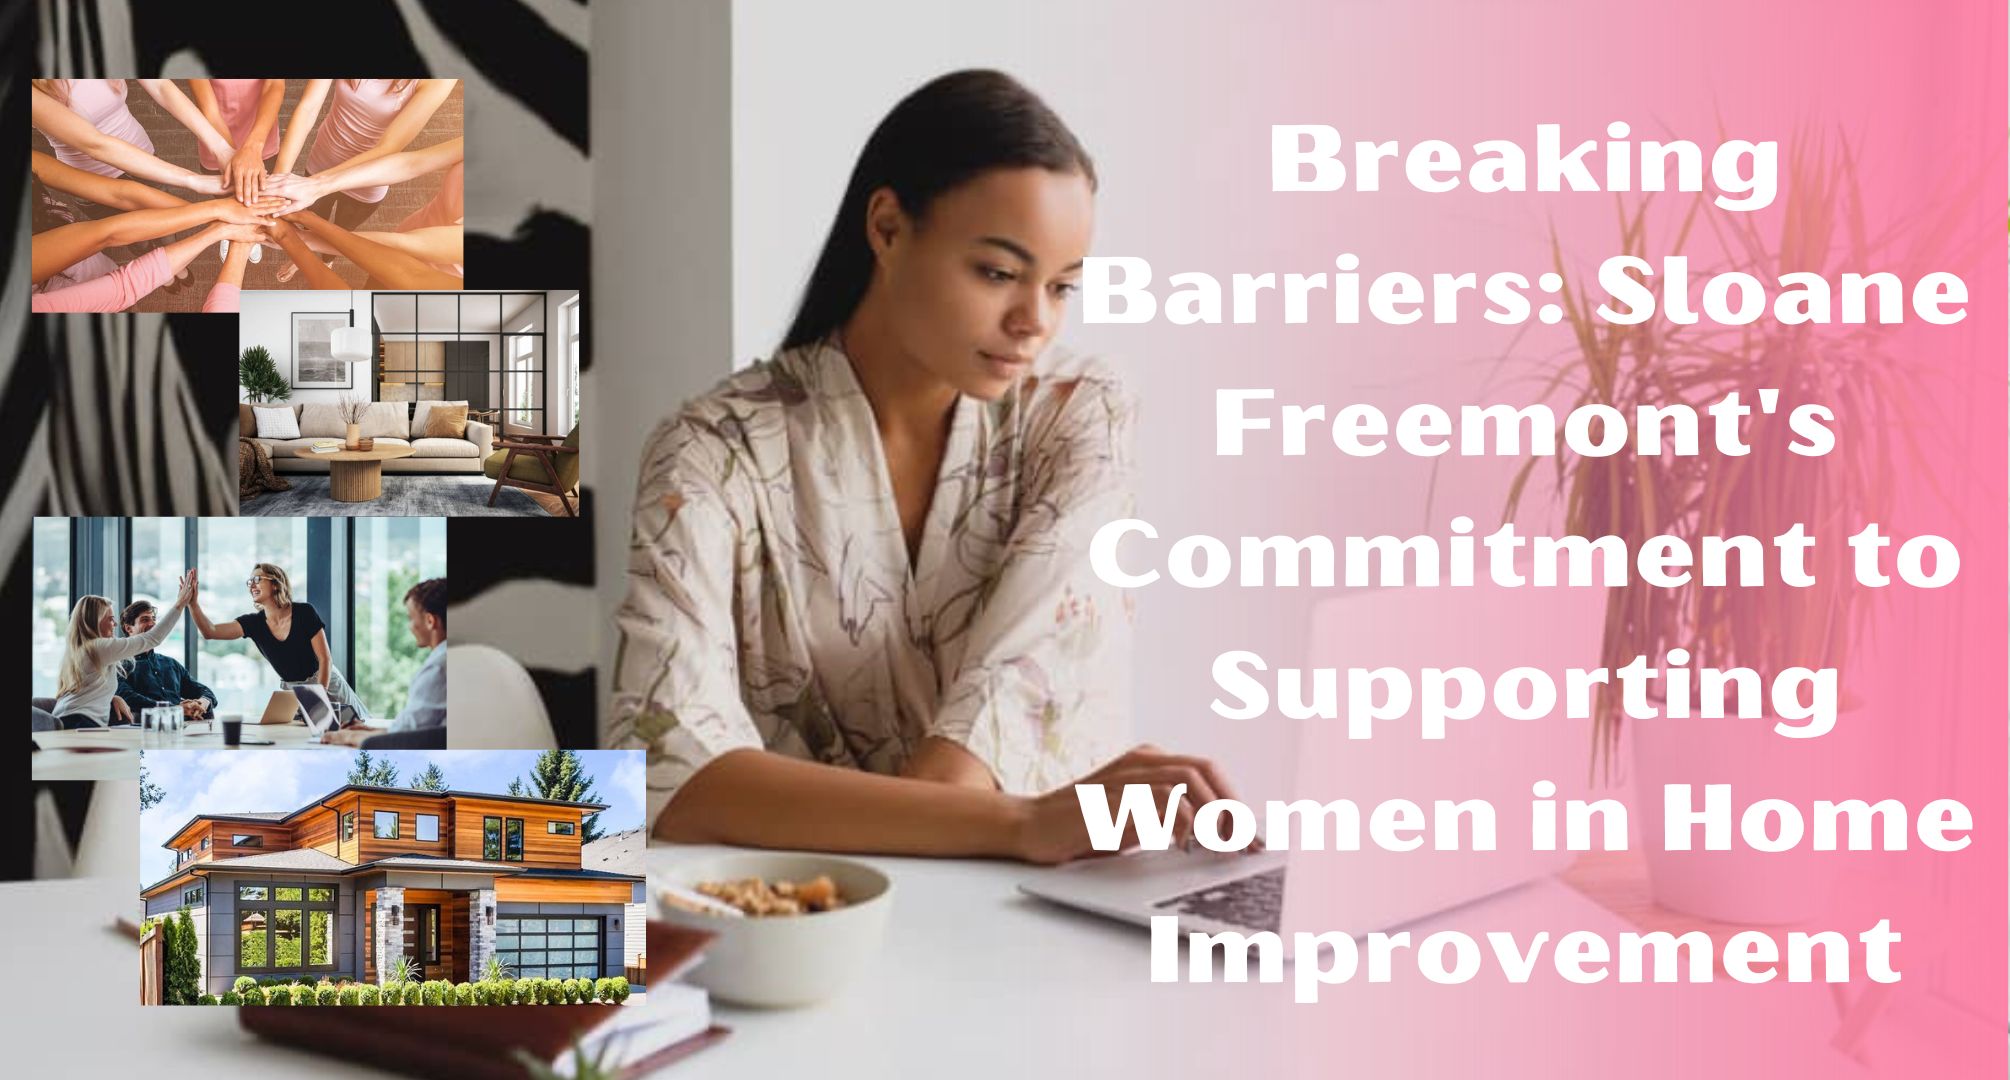 Breaking Barriers Sloane Freemont's Commitment to Supporting Women in Home Improvement